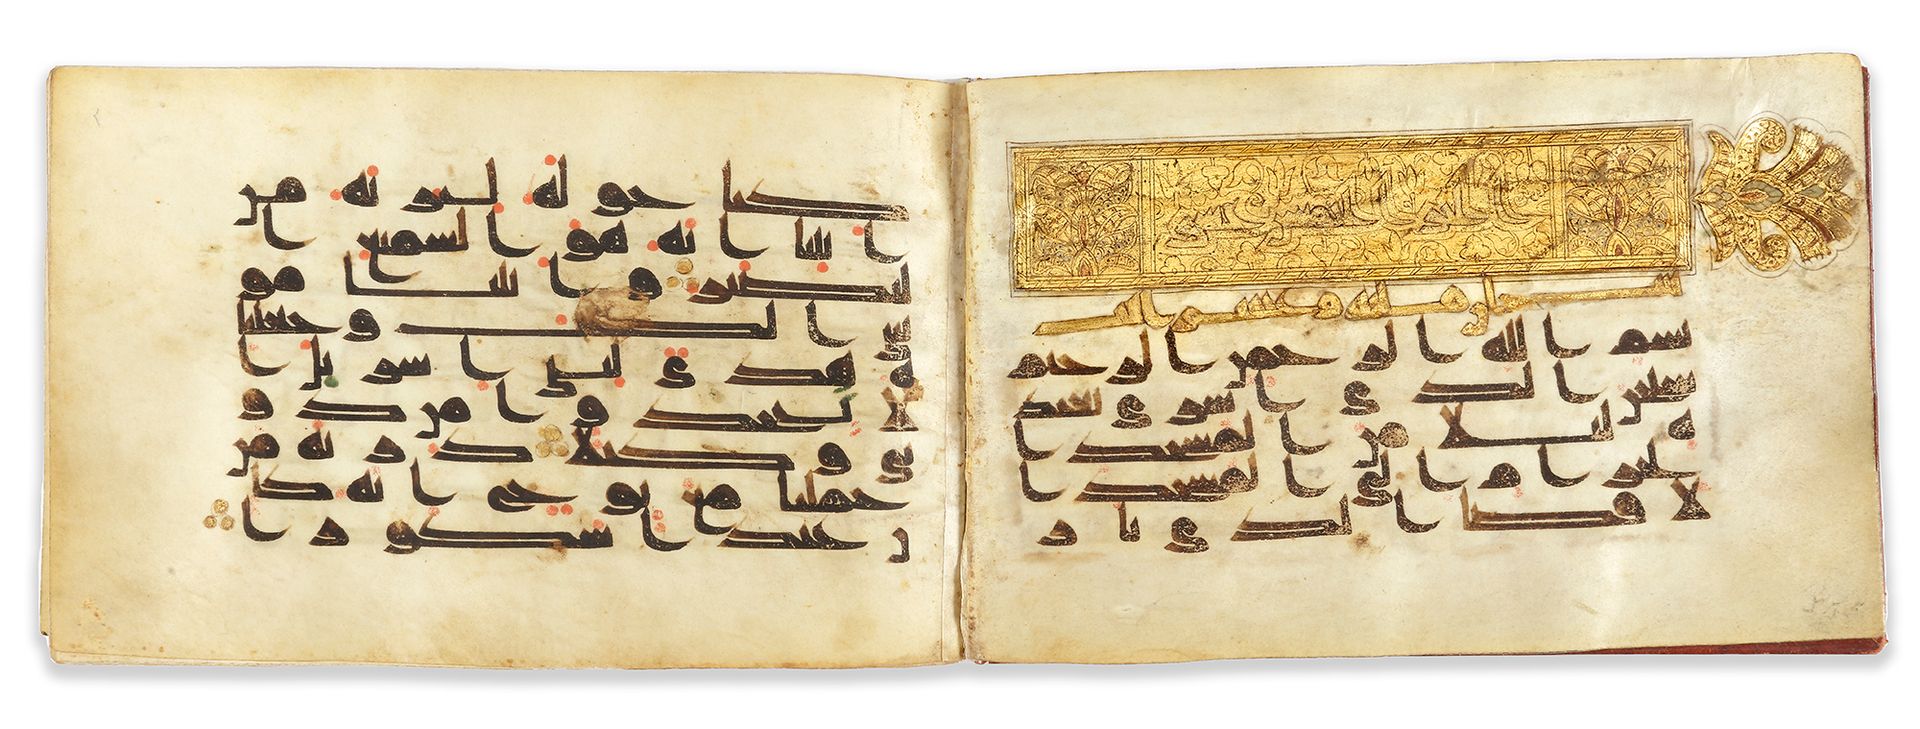 AN EASTERN KUFIC SECTION ON VELLUM, NORTH AFRICA OR NEAR EAST, 9TH CENTURY 牛皮纸上的&hellip;